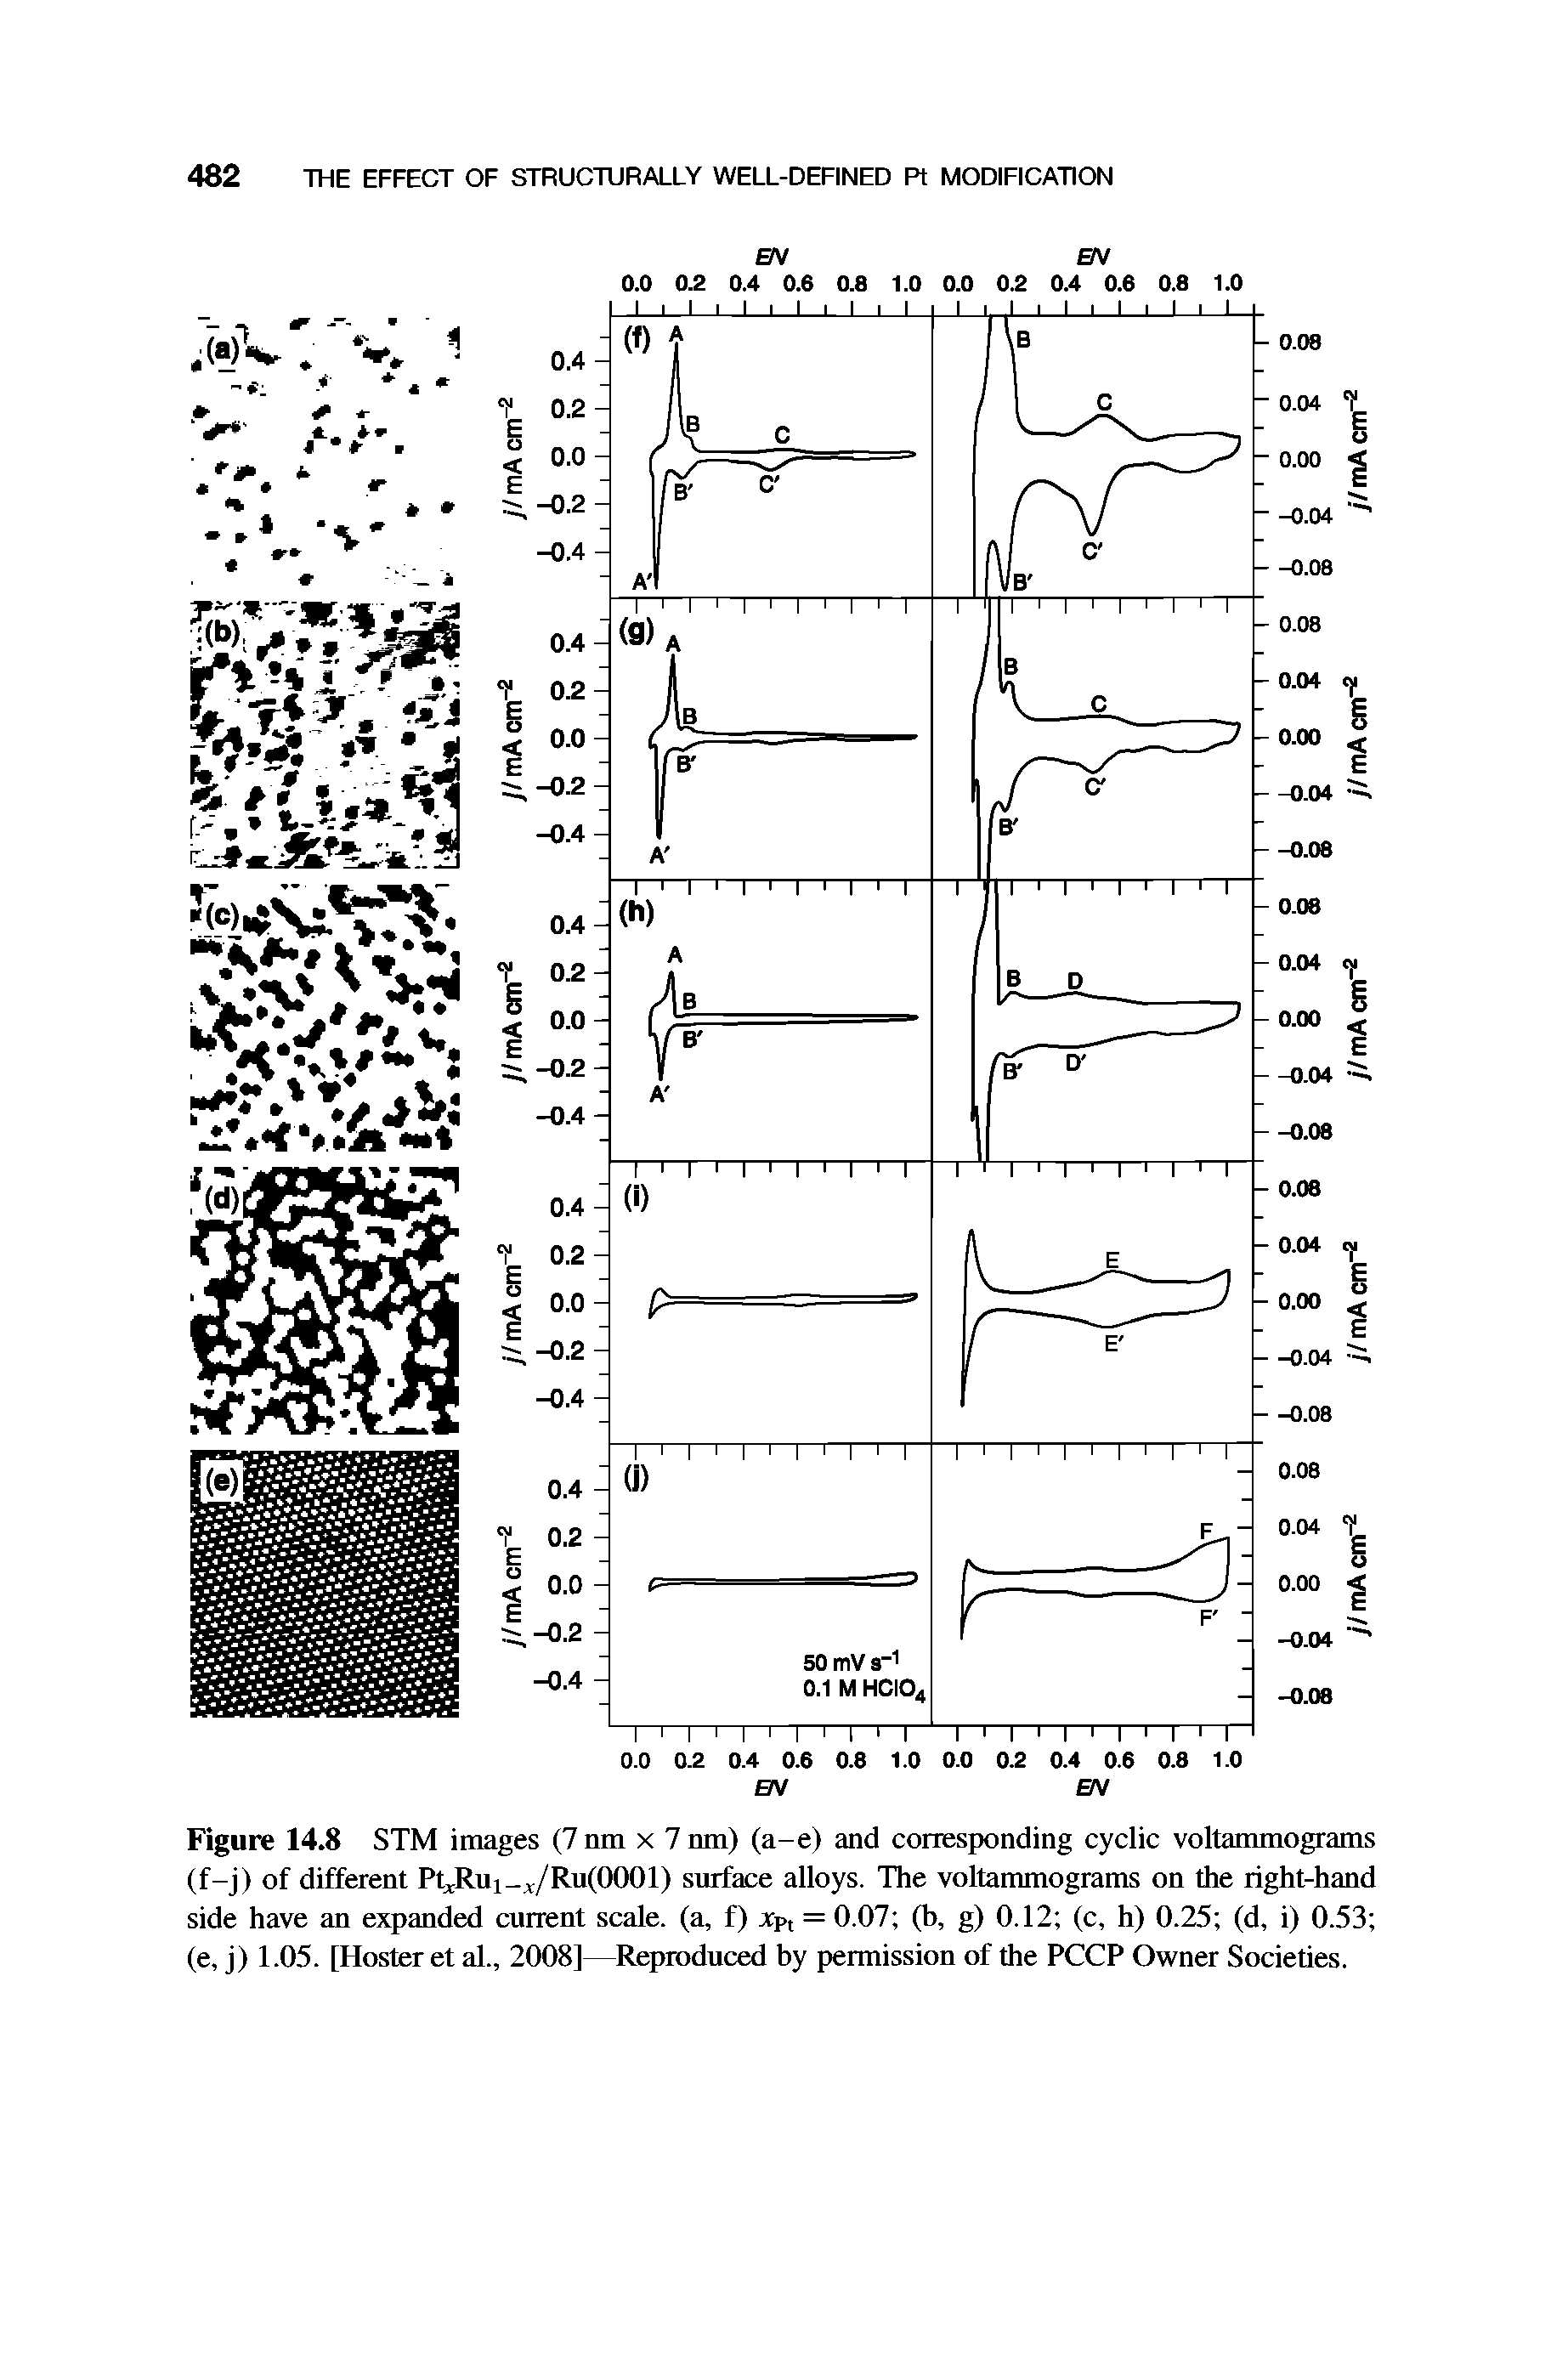 Figure 14.8 STM images (7 nm x 7 nm) (a-e) and corresponding cyclic voltammograms (f-j) of different PtcRui /Ru(0001) surface alloys. The voltammograms on the right-hand side have an expanded current scale, (a, f) xpt = 0.07 (b, g) 0.12 (c, h) 0.25 (d, i) 0.53 (e, j) 1.05. [Hosier et al., 2008]—Reproduced by permission of the PCCP Owner Societies.